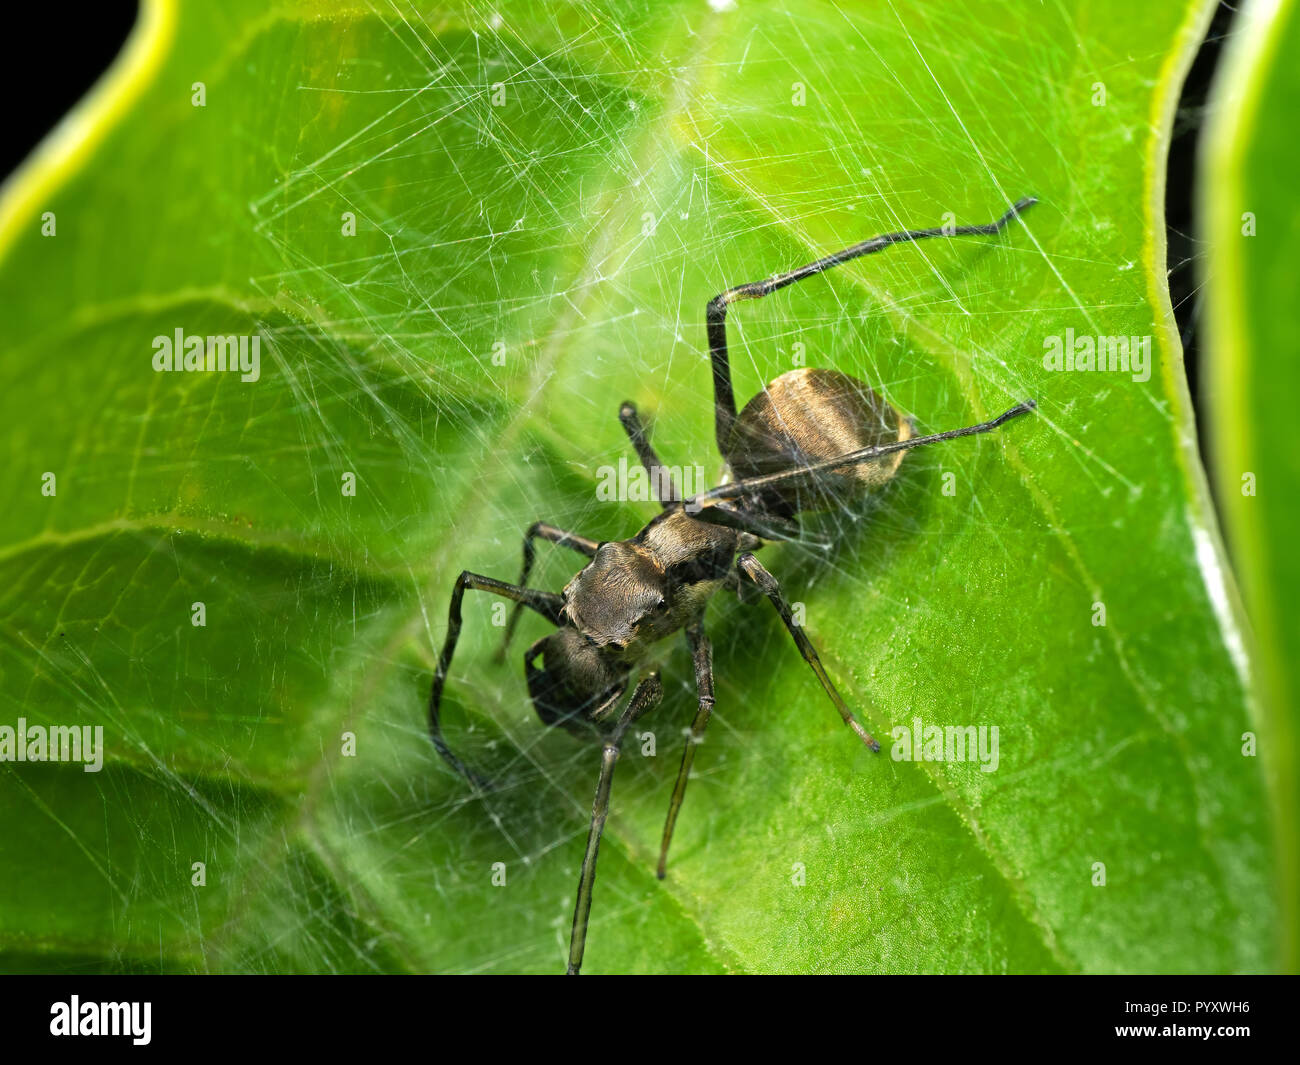 Macro Photography of Ant Mimic Jumping Spider in Web on Green Leaf Stock Photo